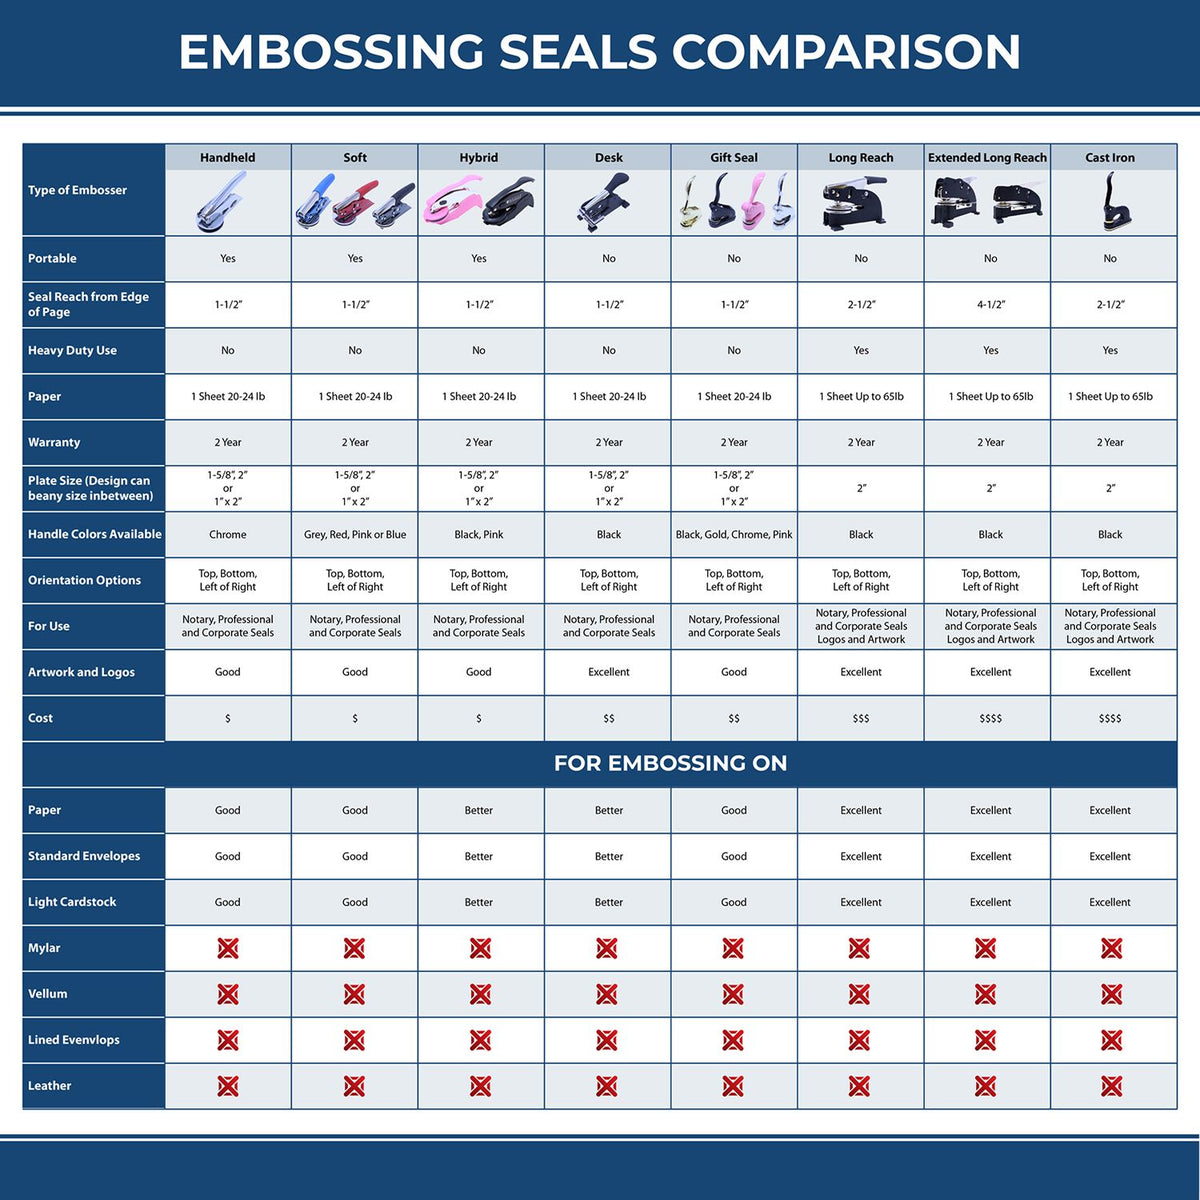 A comparison chart for the different types of mount models available for the State of Virginia Soft Land Surveyor Embossing Seal.